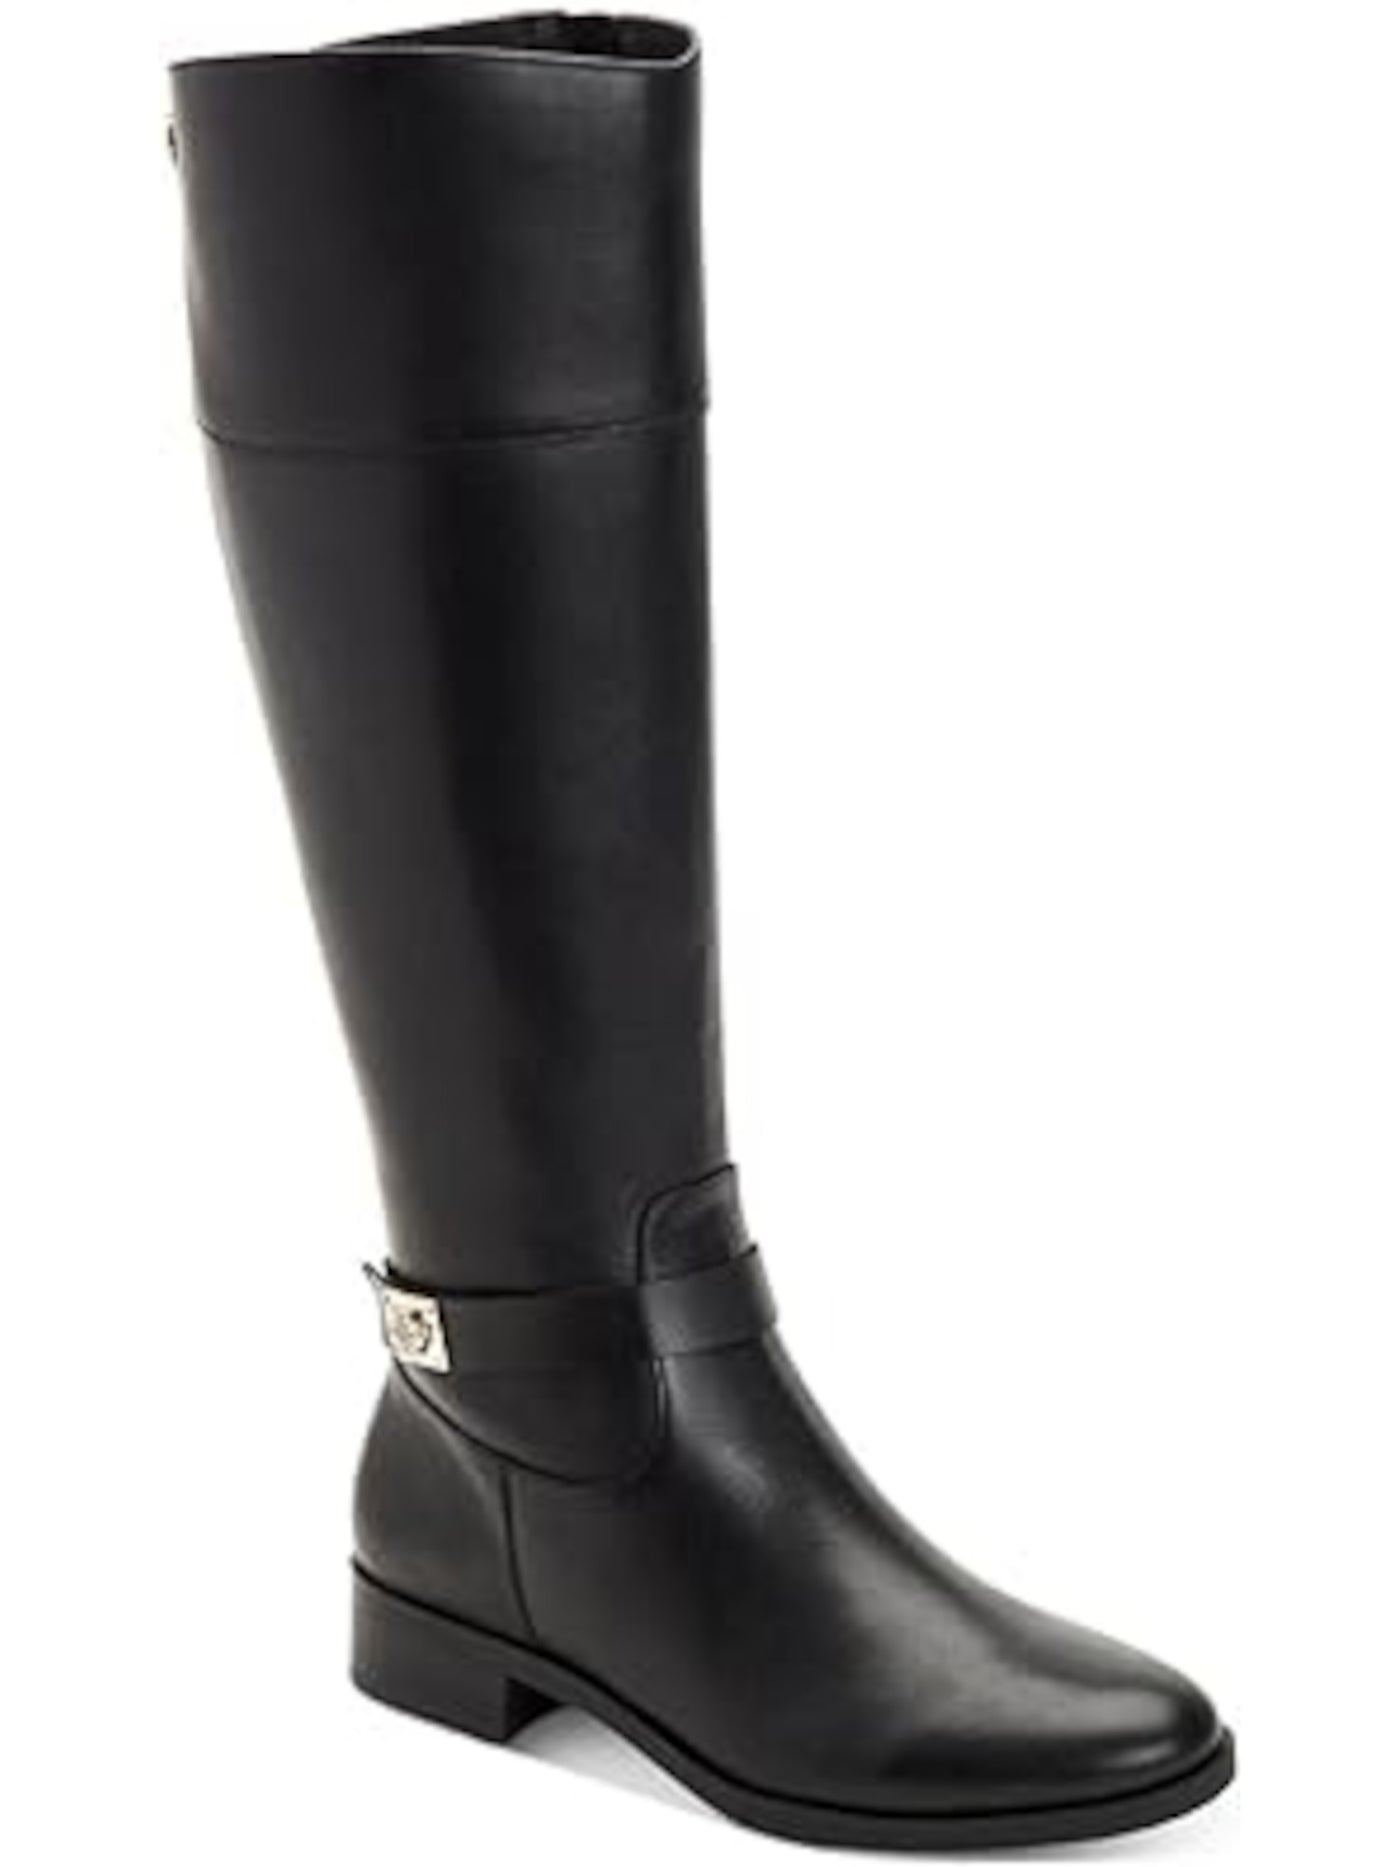 CHARTER CLUB Womens Black Buckle Accent Johannes Round Toe Zip-Up Riding Boot 5.5 M